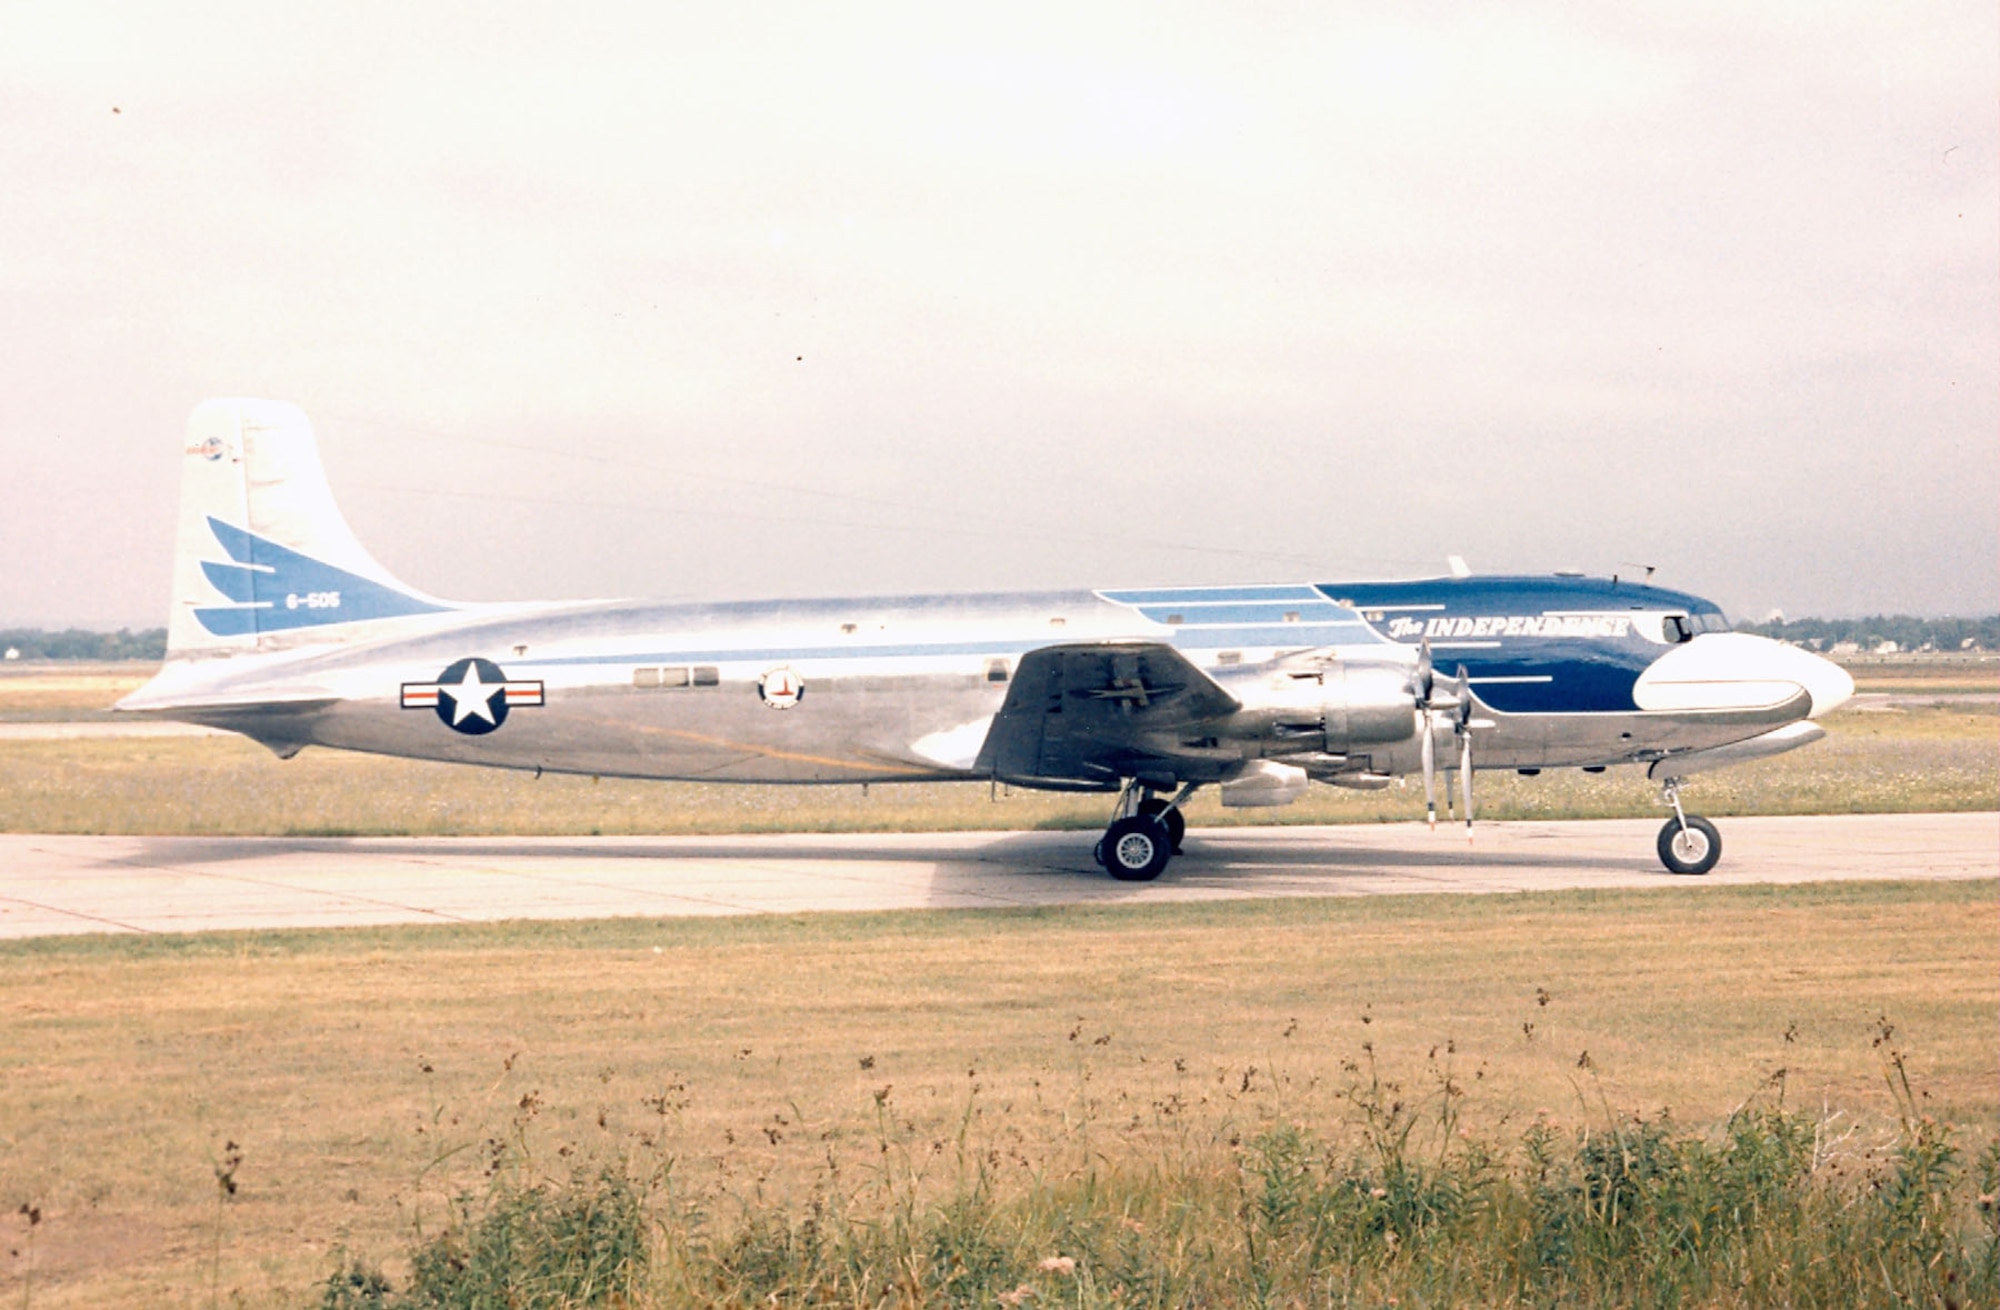 DAYTON, Ohio -- Douglas VC-118 "Independence" at the National Museum of the United States Air Force. (U.S. Air Force photo)